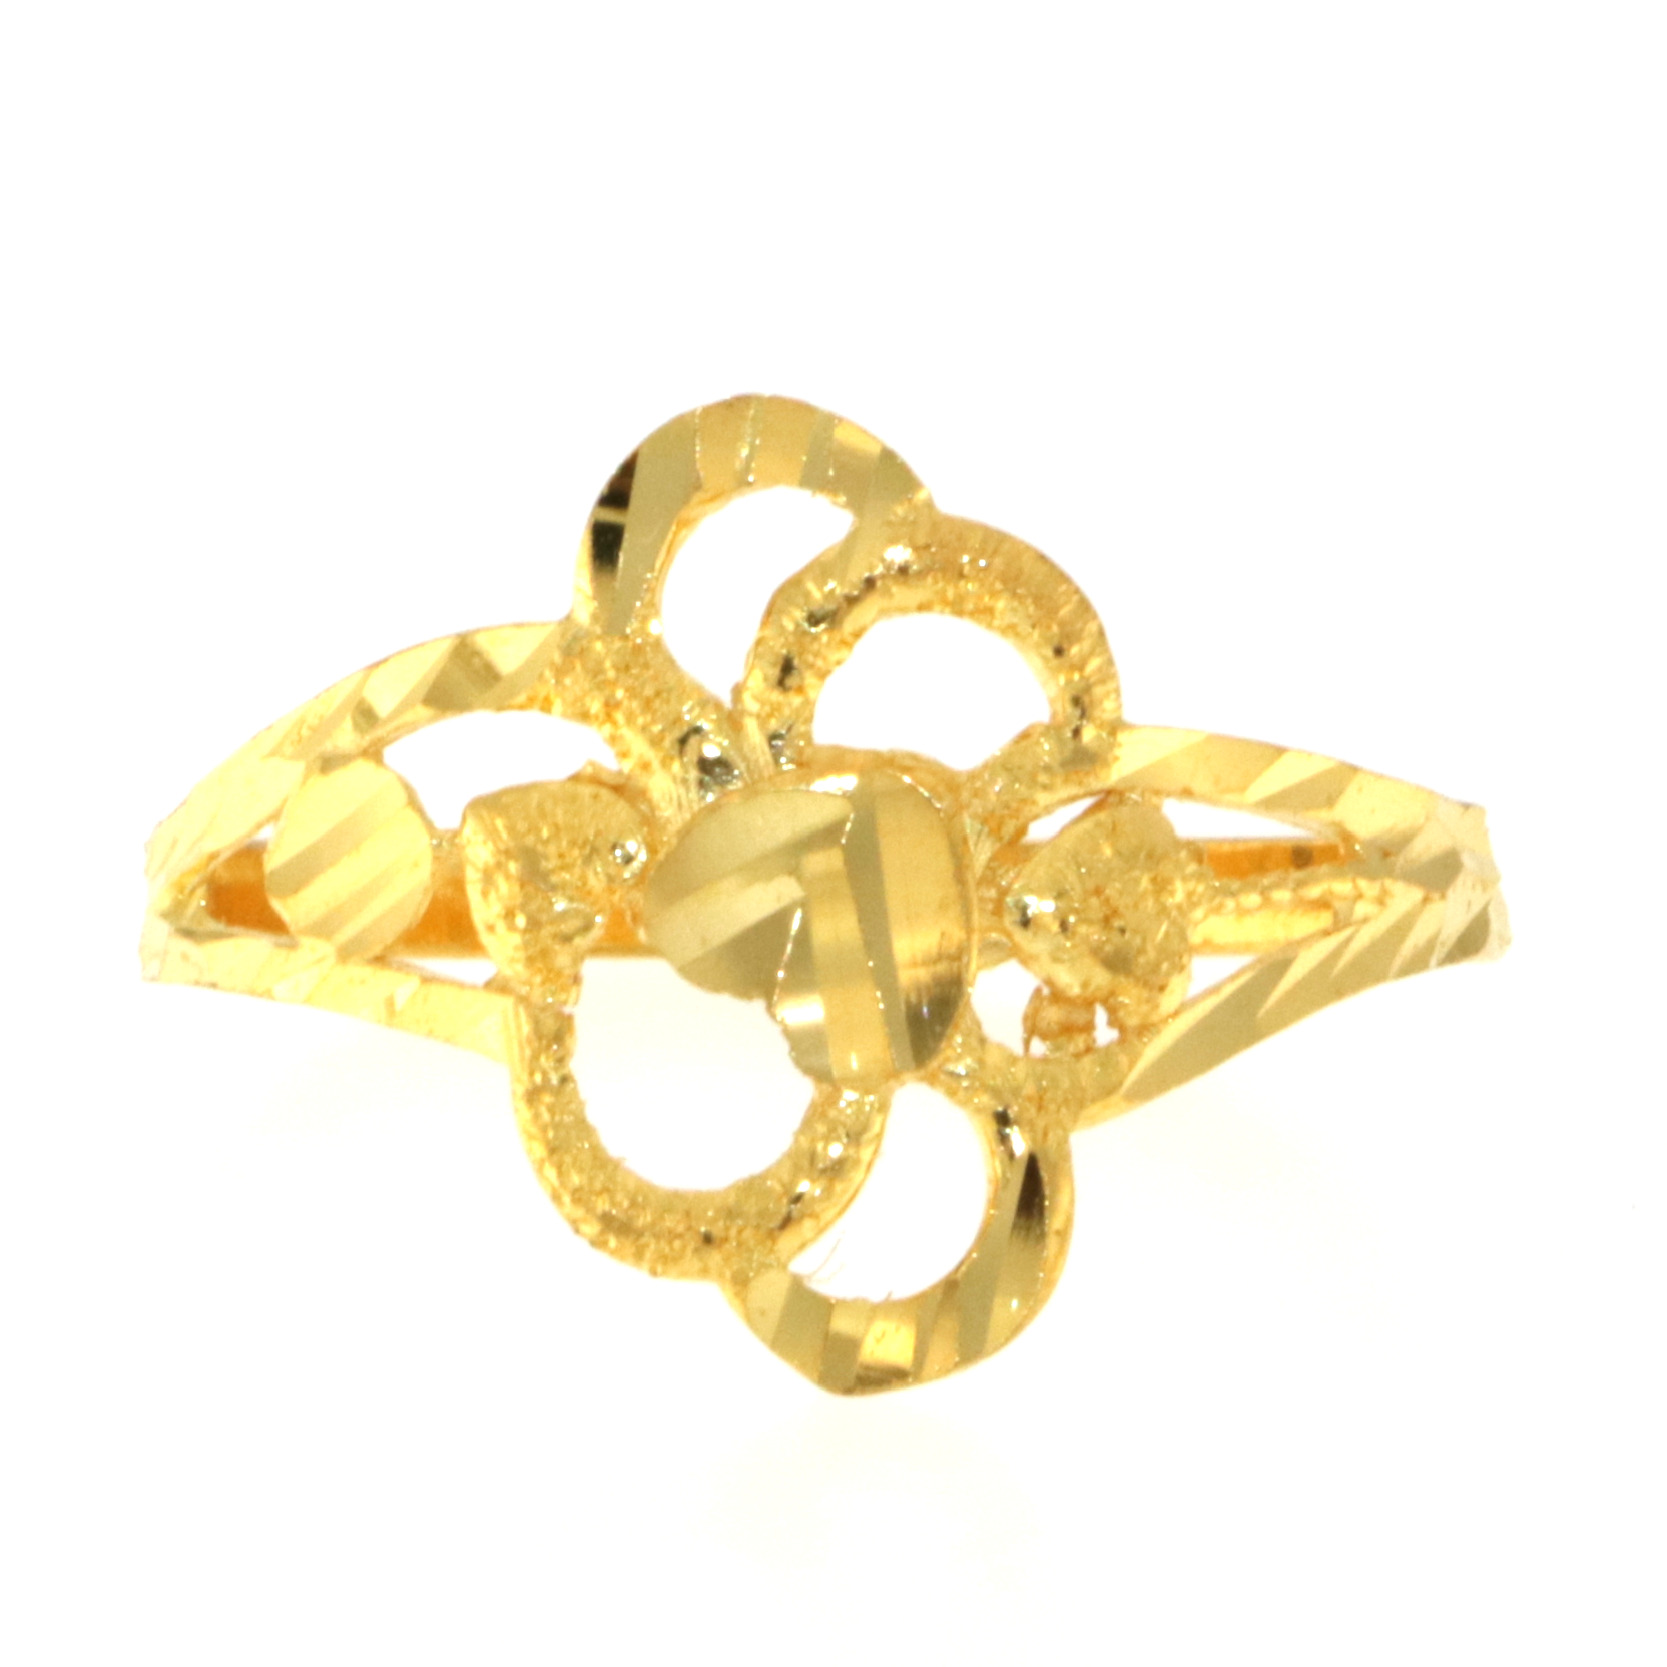 22ct Real Gold Asian/Indian/Pakistani Style Heart Ring